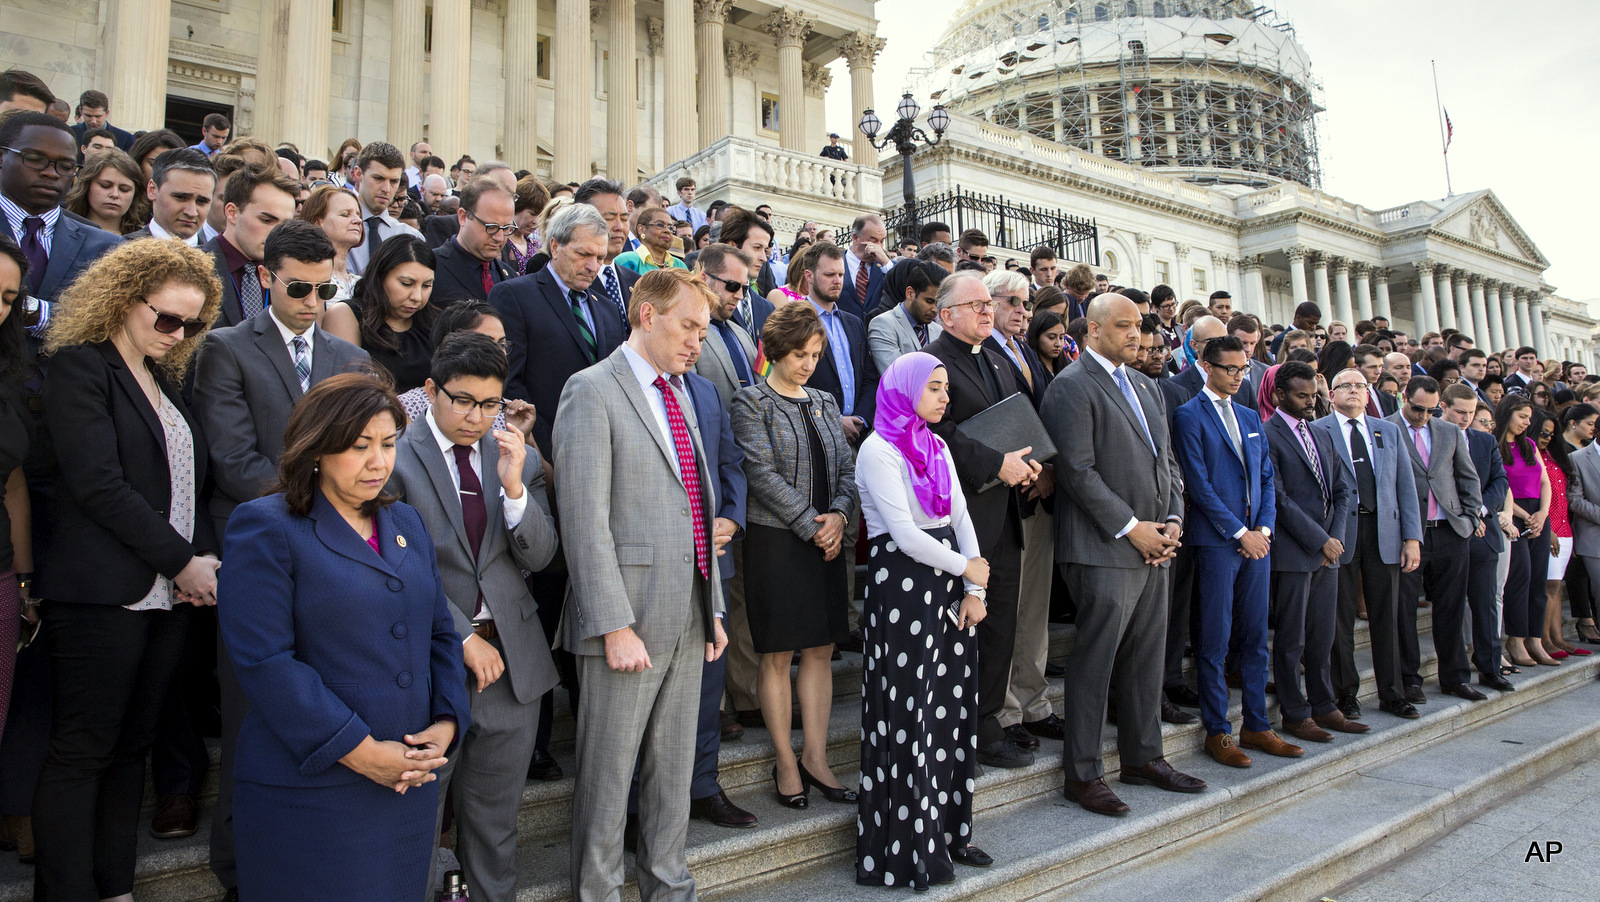 The LGBT Congressional Staff Association, the Congressional Muslim Staff Association, and members of Congress gather for a prayer and moment of silence on the steps of the Capitol in Washington, Monday, June 13, 2016.